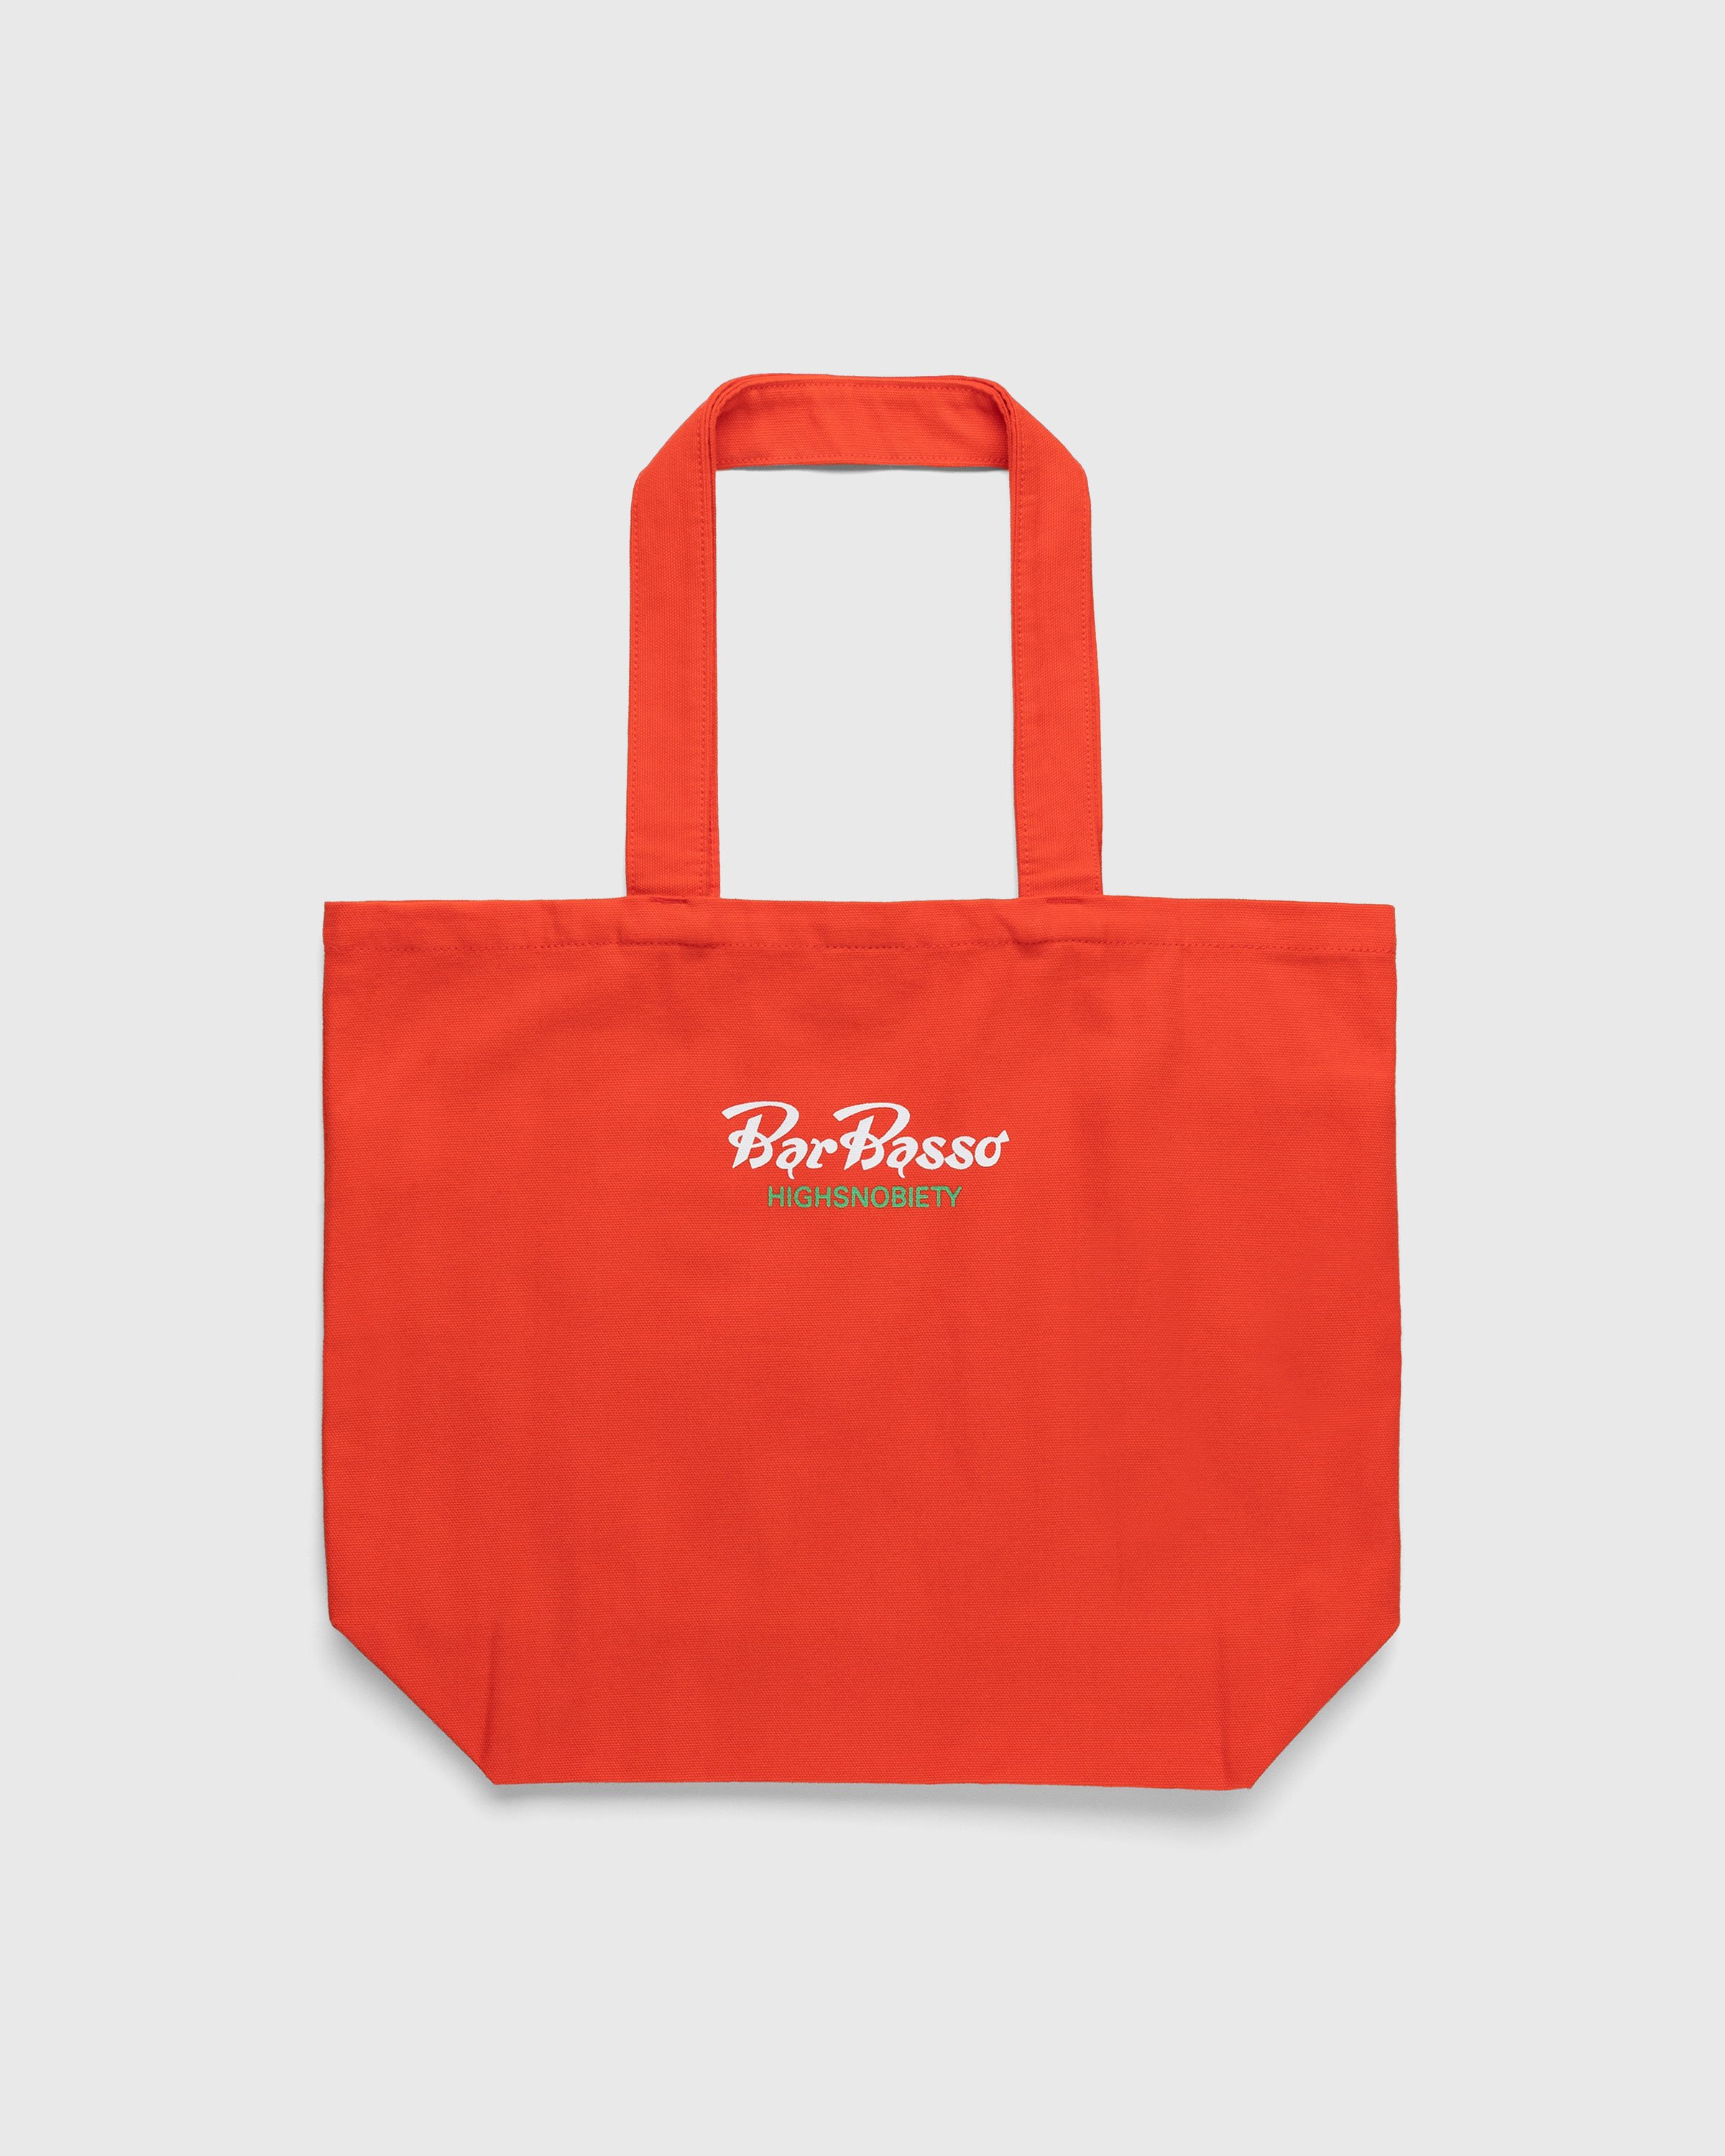 Bar Basso x Highsnobiety - Sbagliato Tote Bag Red - Accessories - Red - Image 2